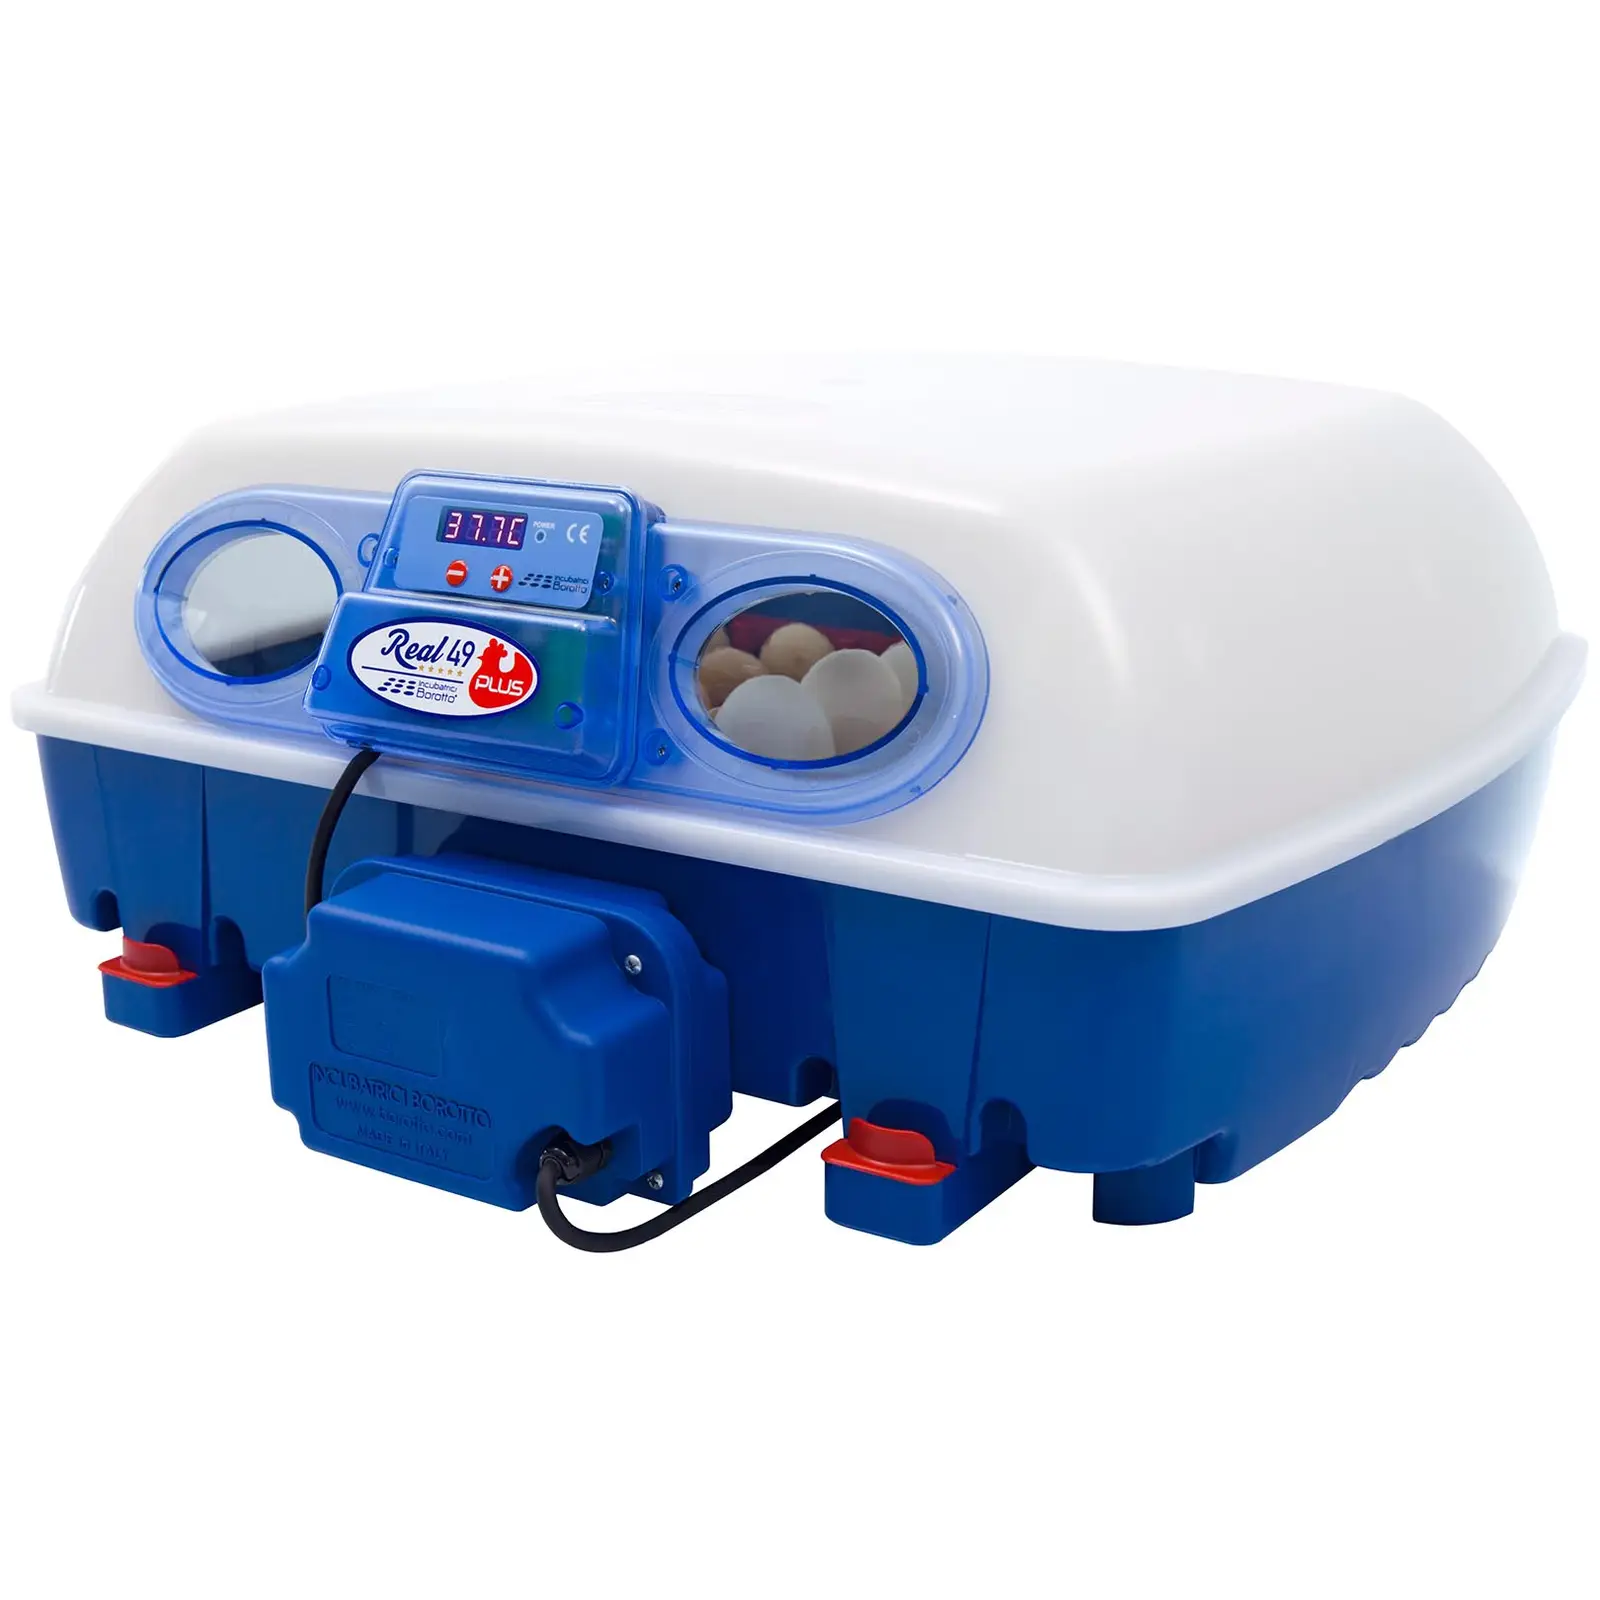 Incubator - 49 eggs - fully automatic - antimicrobial biomaster protection